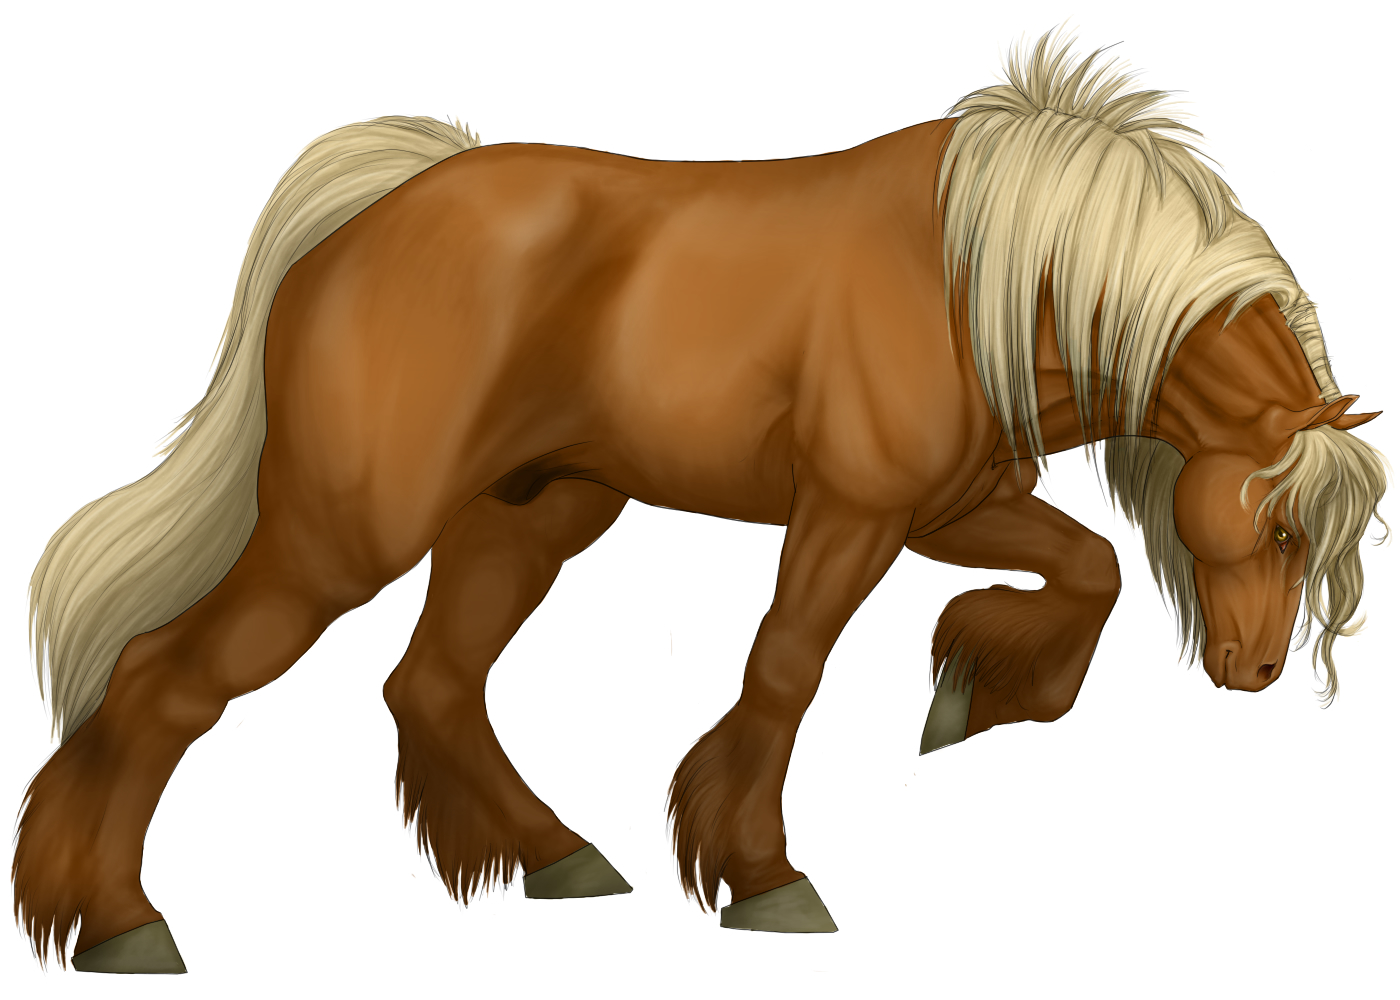 horse background clipart - photo #10